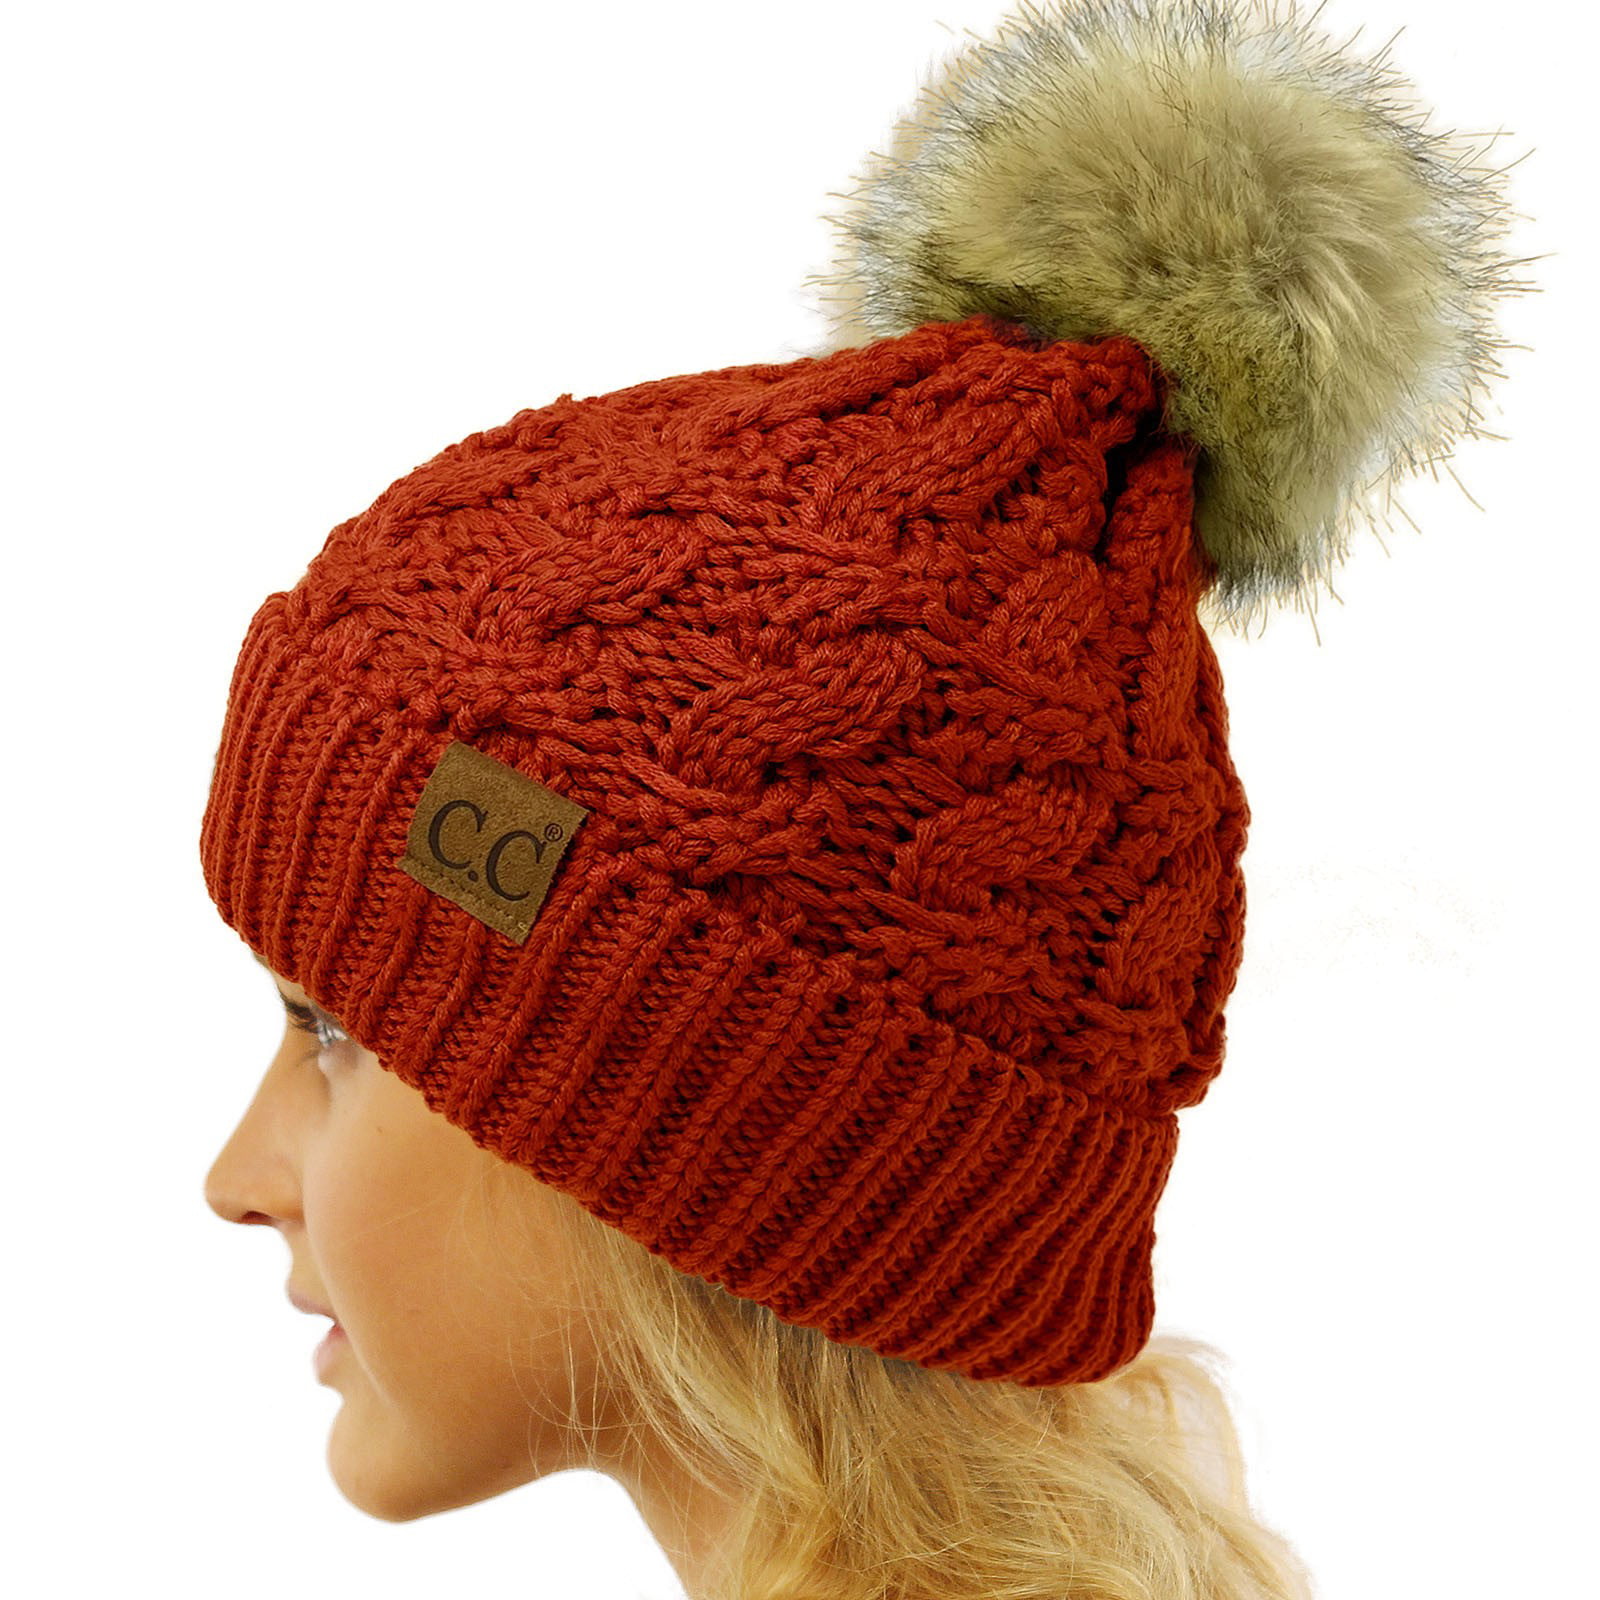 Medium NWT Gap Girls Cable Knit Pom Beanie in Red Small 